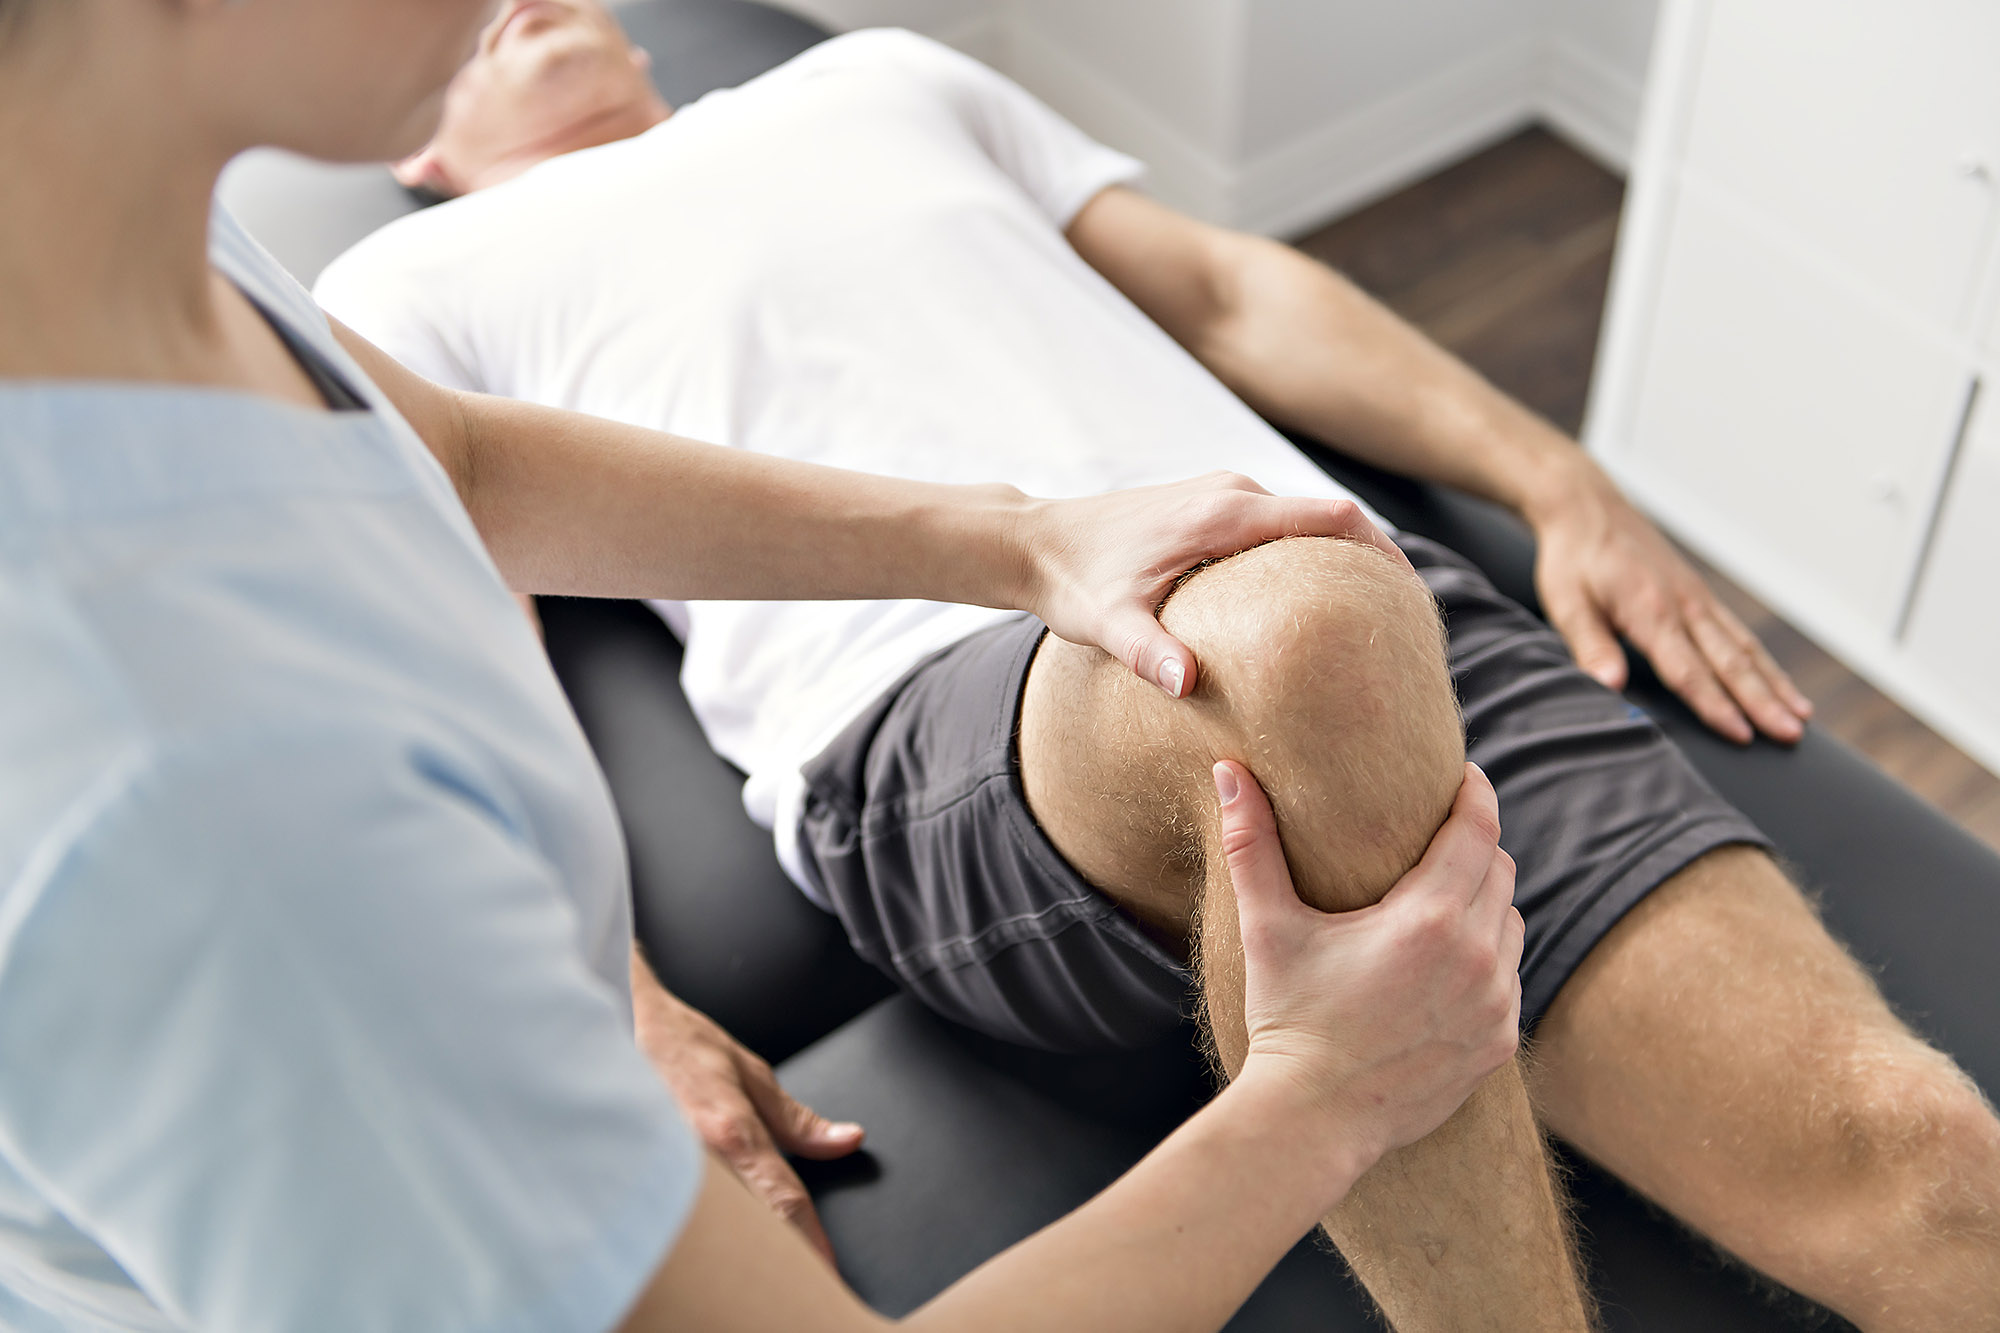 Knee injury compensation claims Manchester - leg injuries